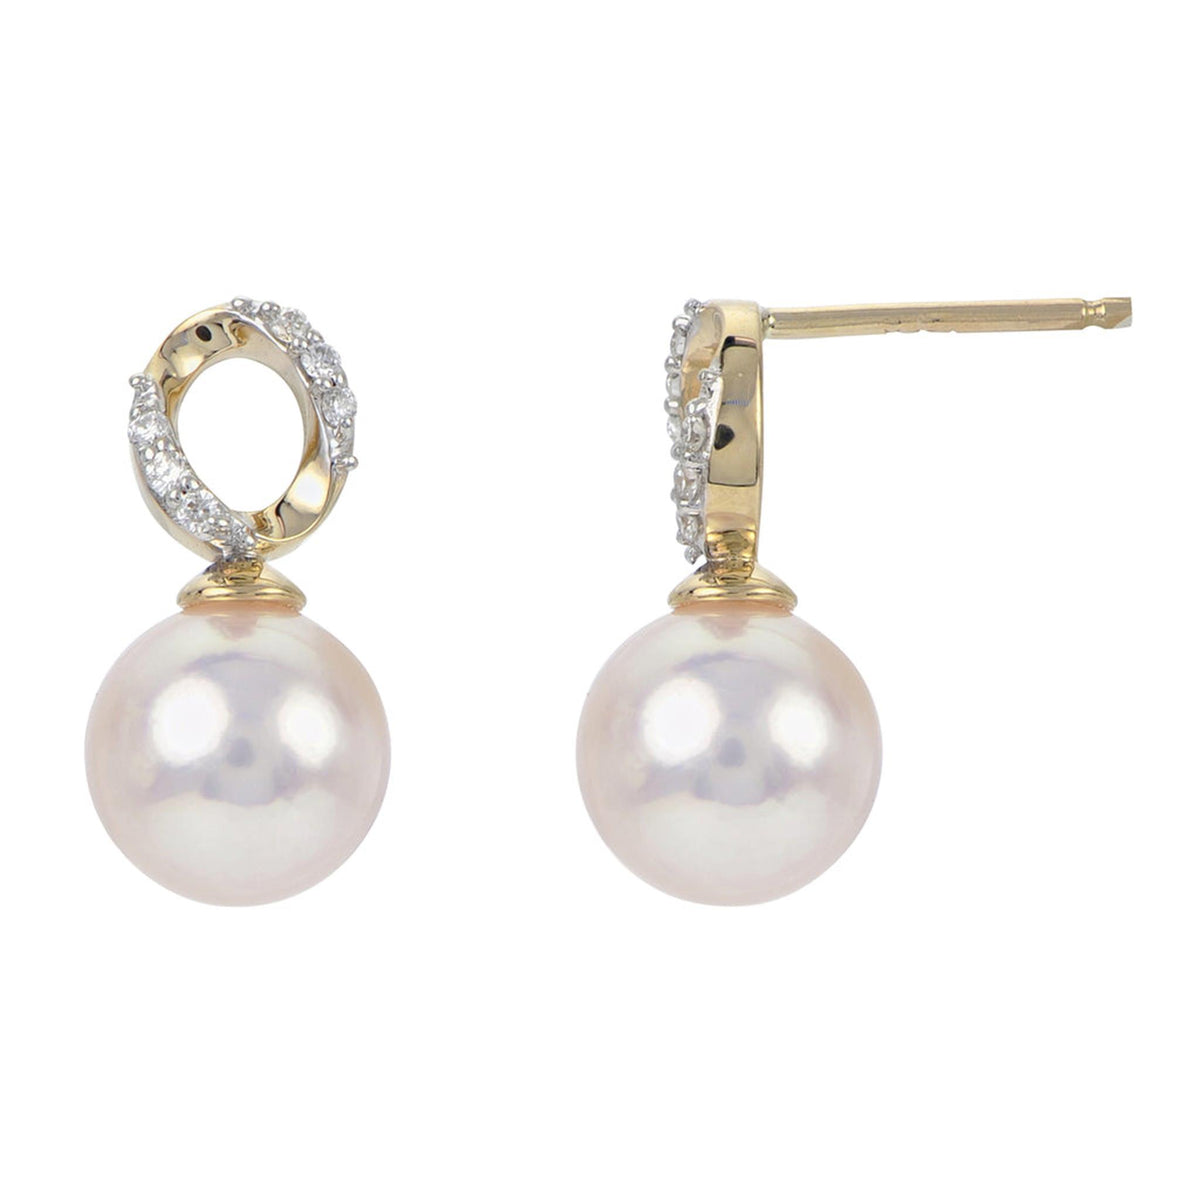 14Kt Yellow Gold Drop Earrings With mm Akoya Cultured Pearl